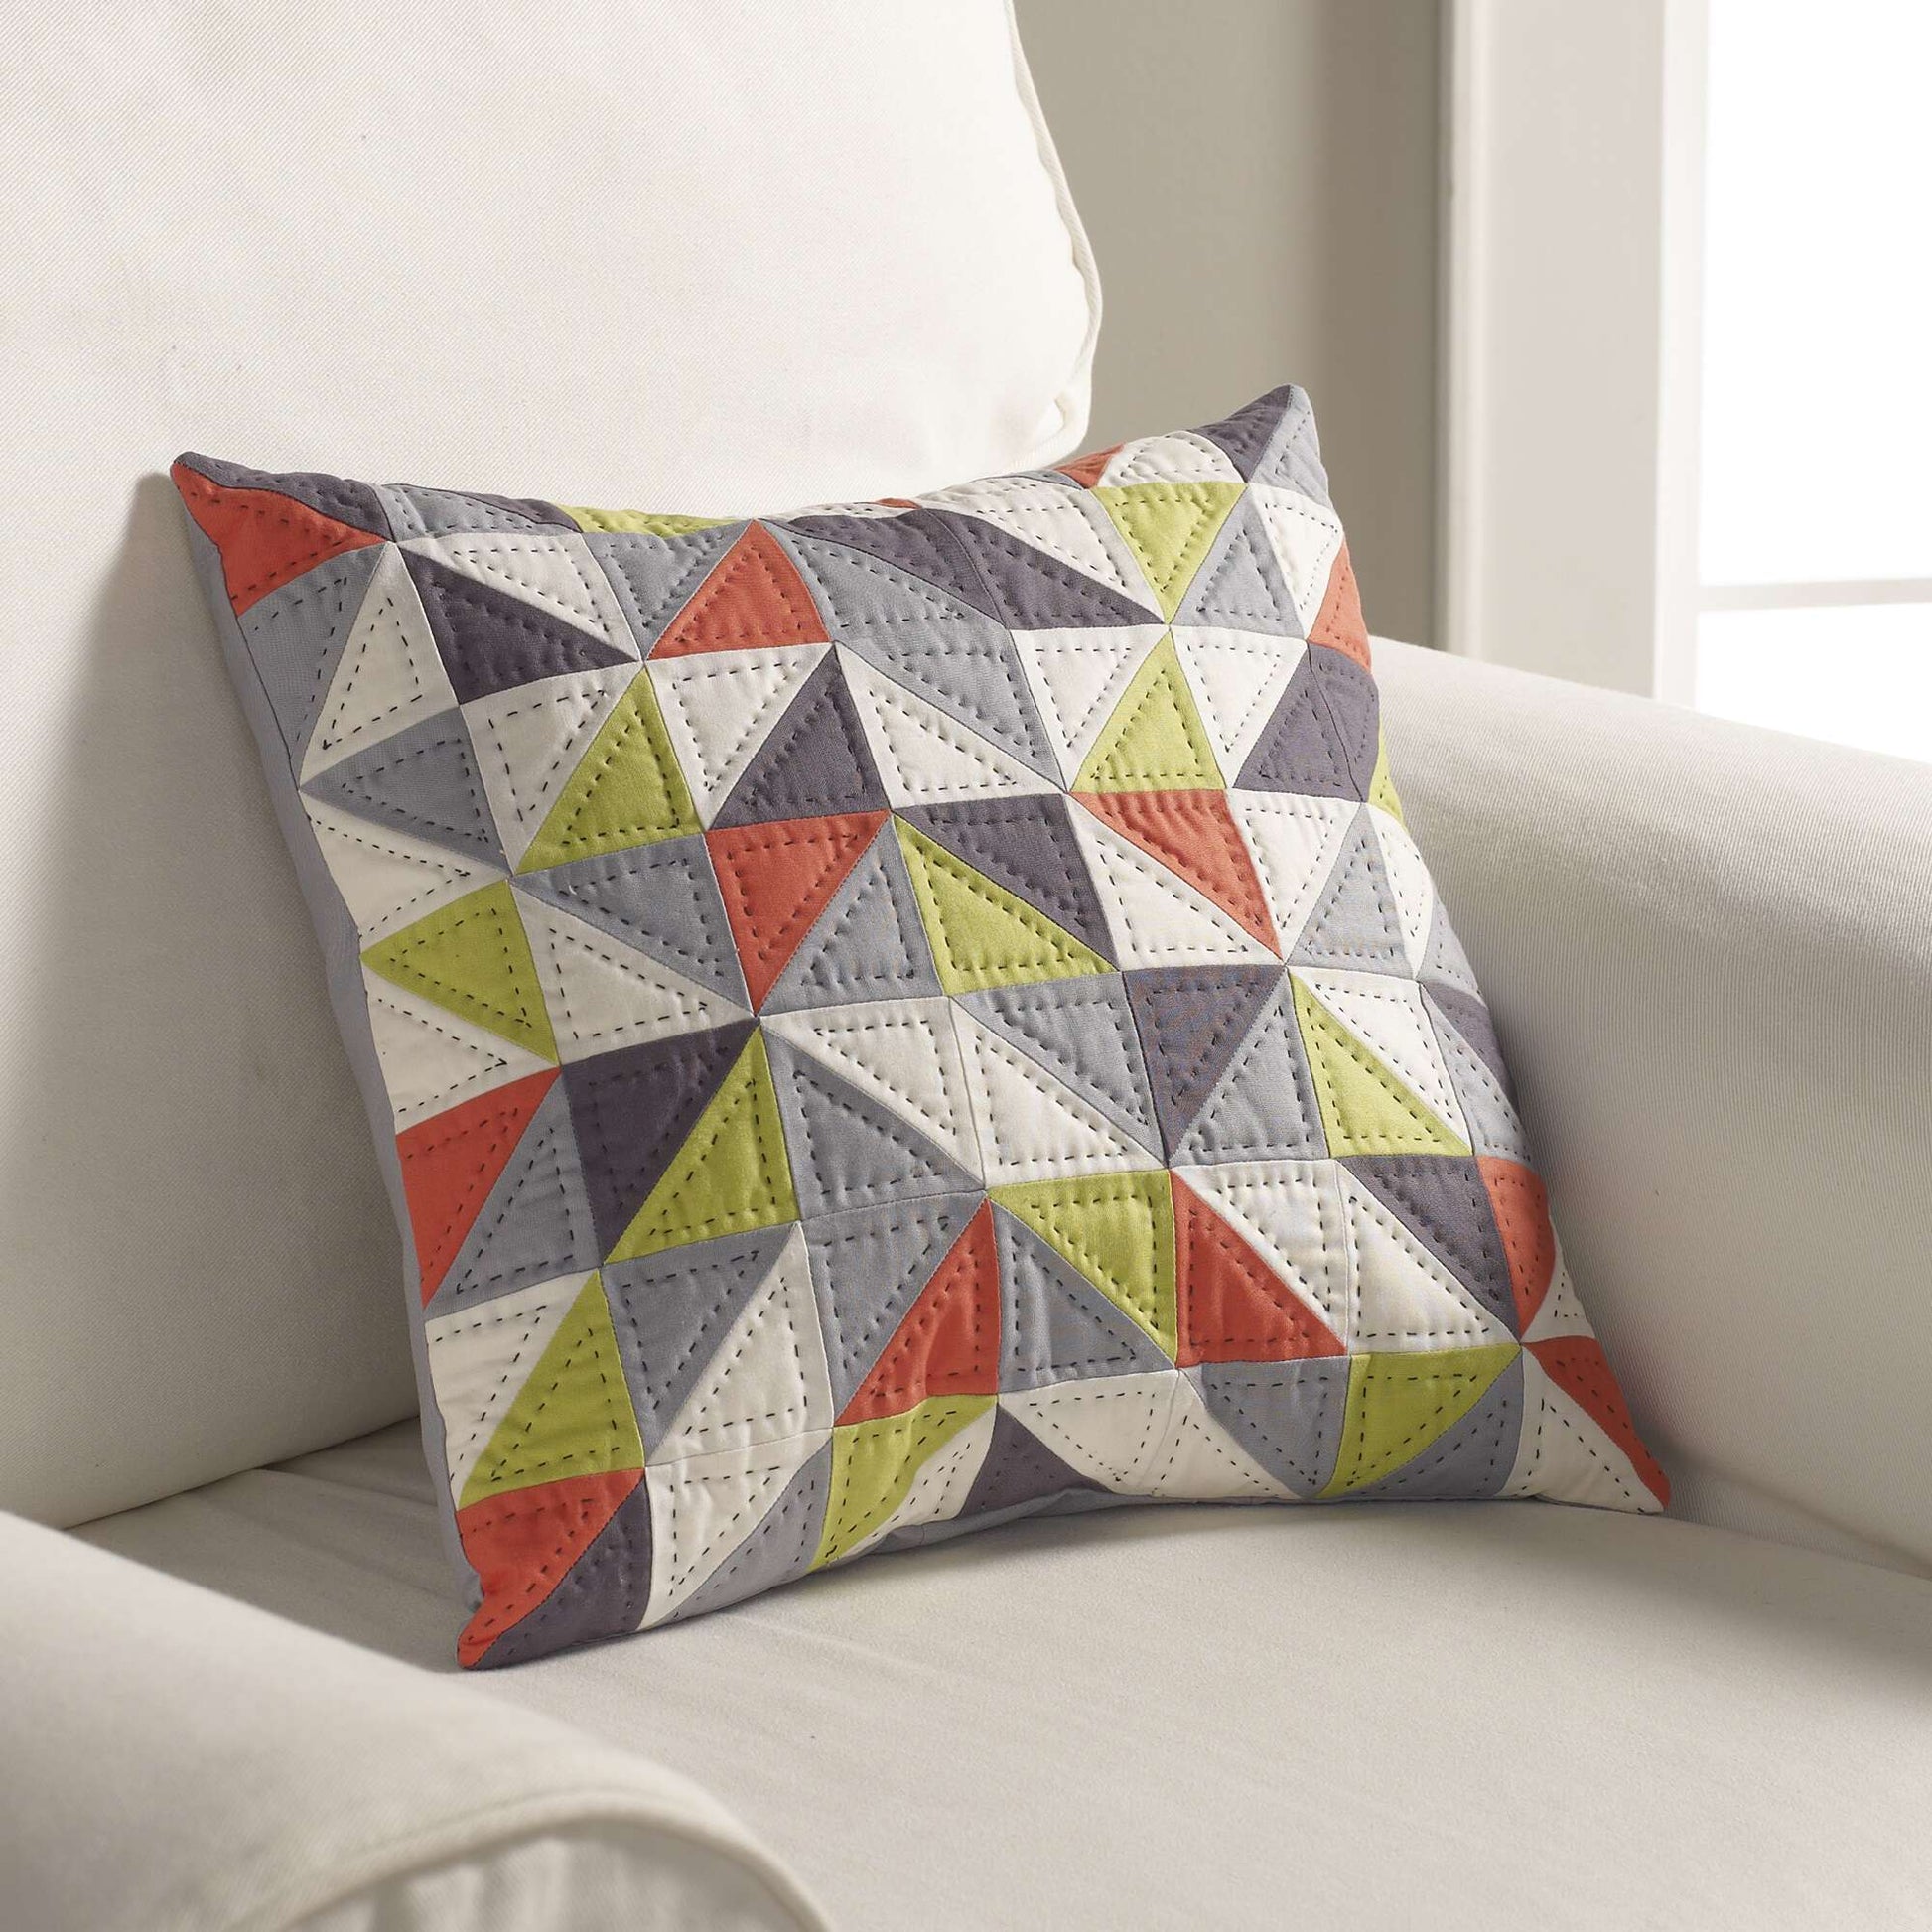 Free Coats & Clark Sewing Spinning Arrows Pillow Pattern